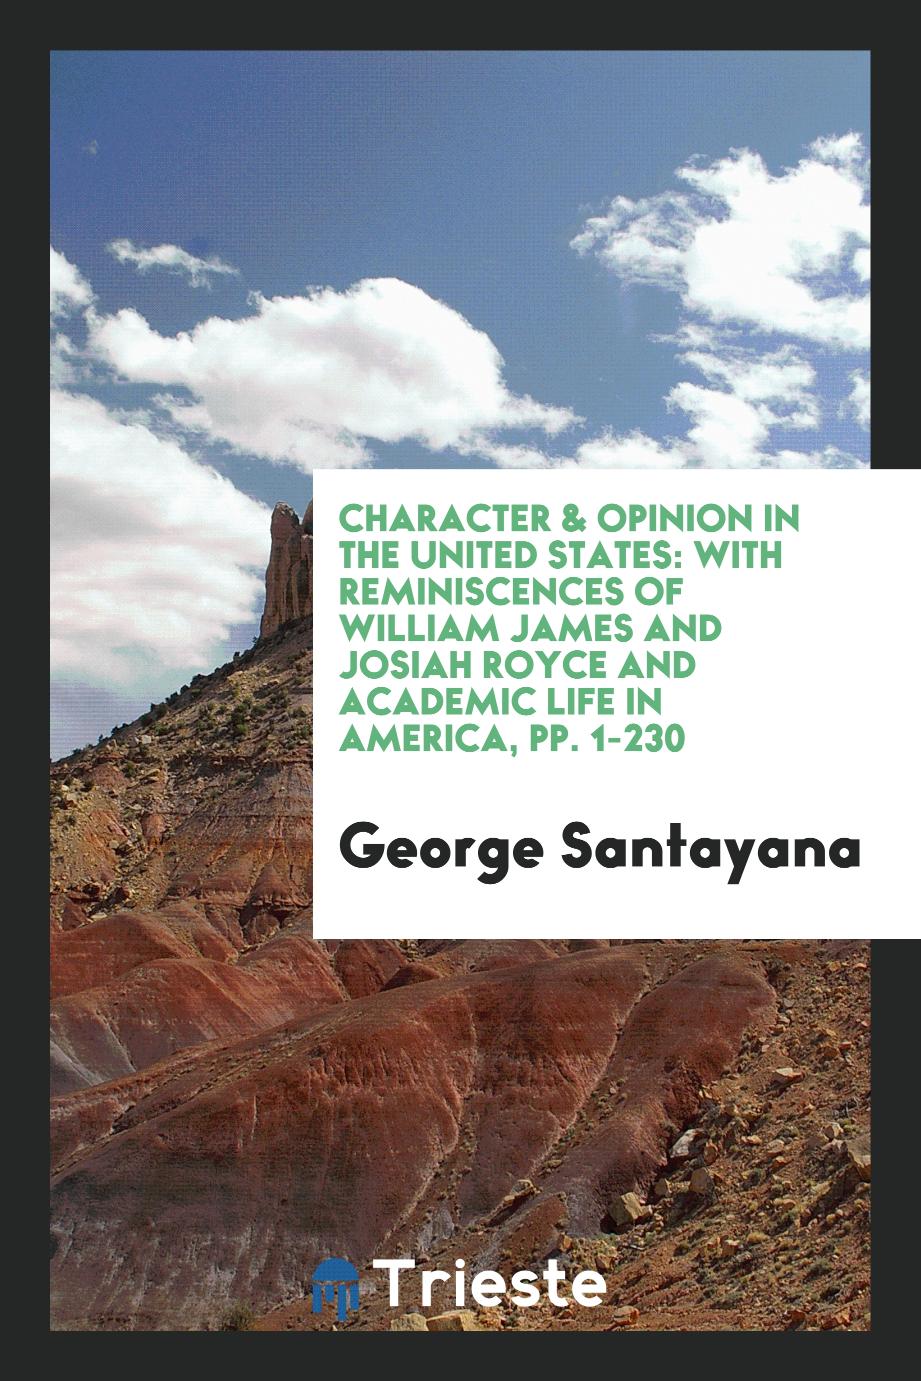 Character & Opinion in the United States: With Reminiscences of William James and Josiah Royce and Academic Life in America, pp. 1-230